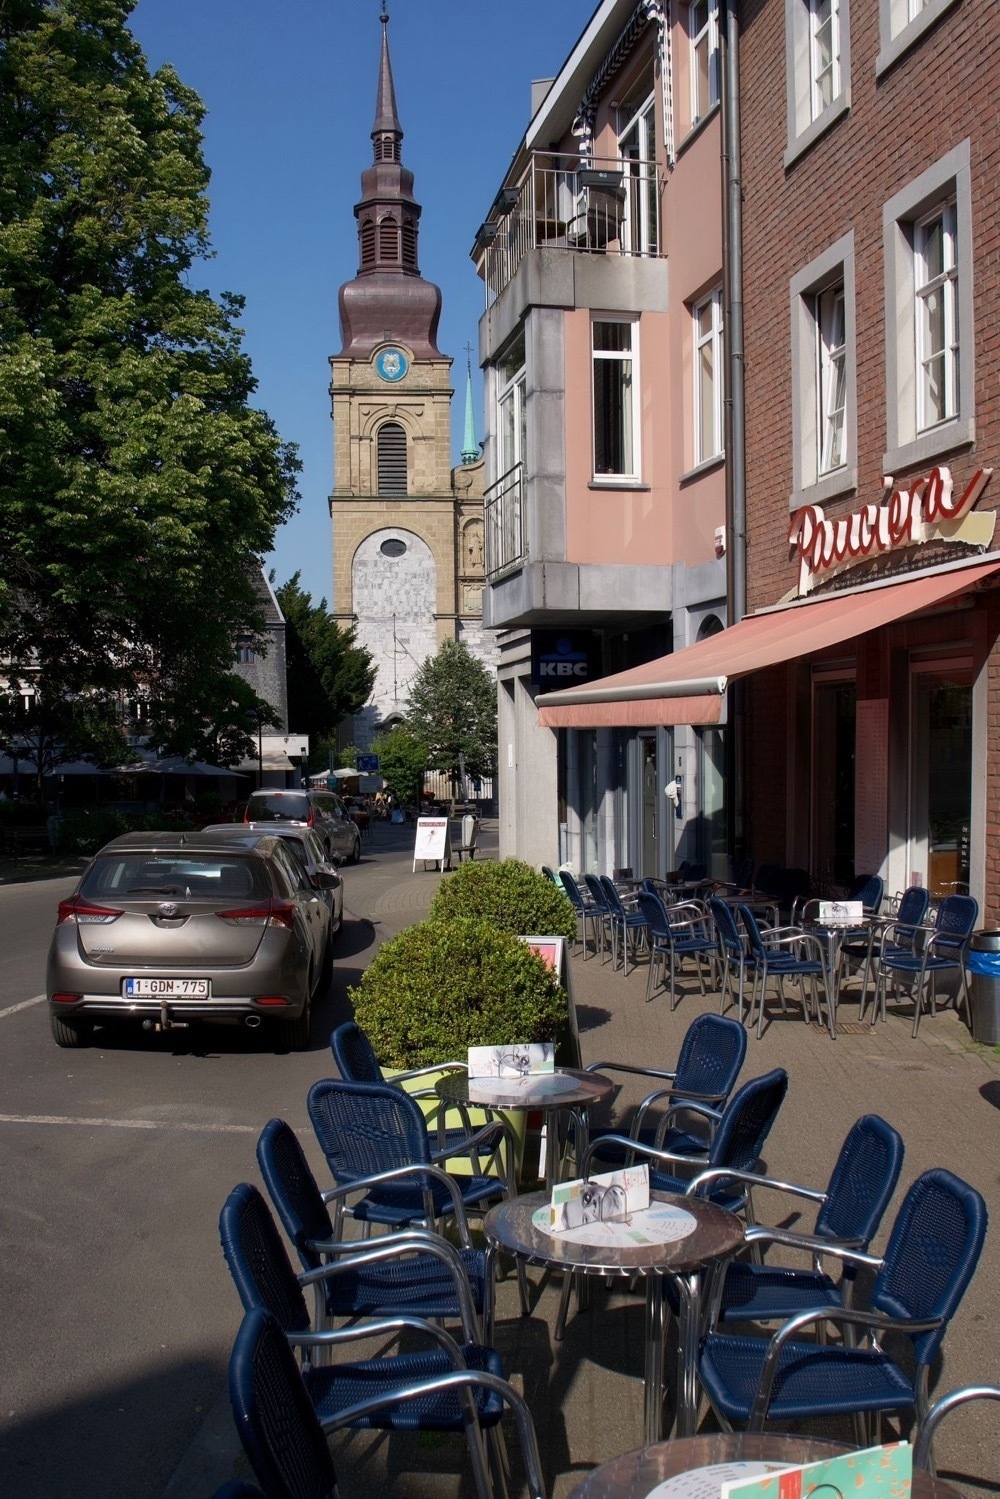 Another street cafe in Eupen, church in the background